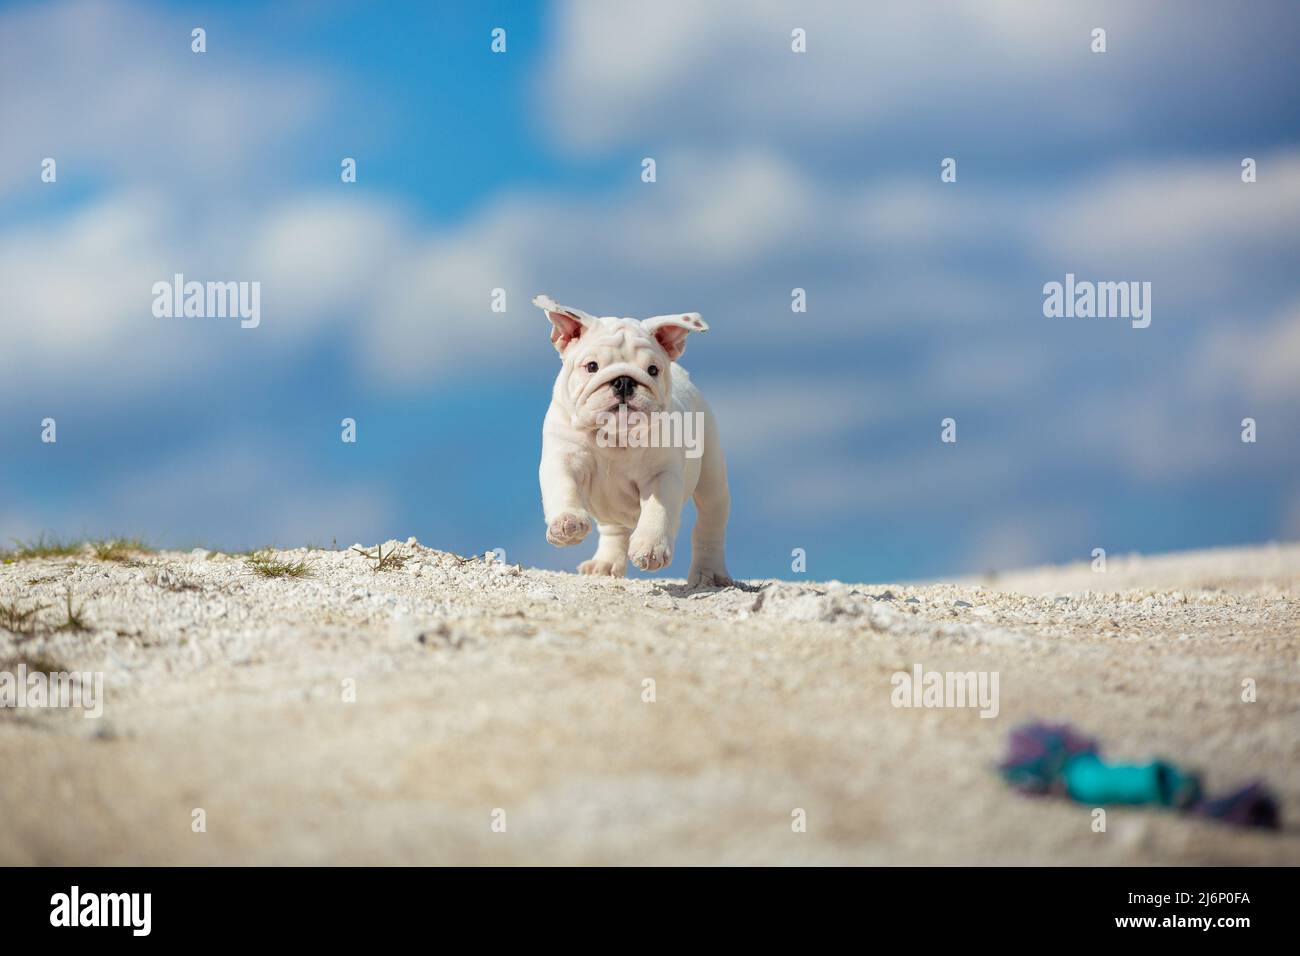 Gorgeous white English Bulldog puppy running towards the toy against a bright blue sky Stock Photo